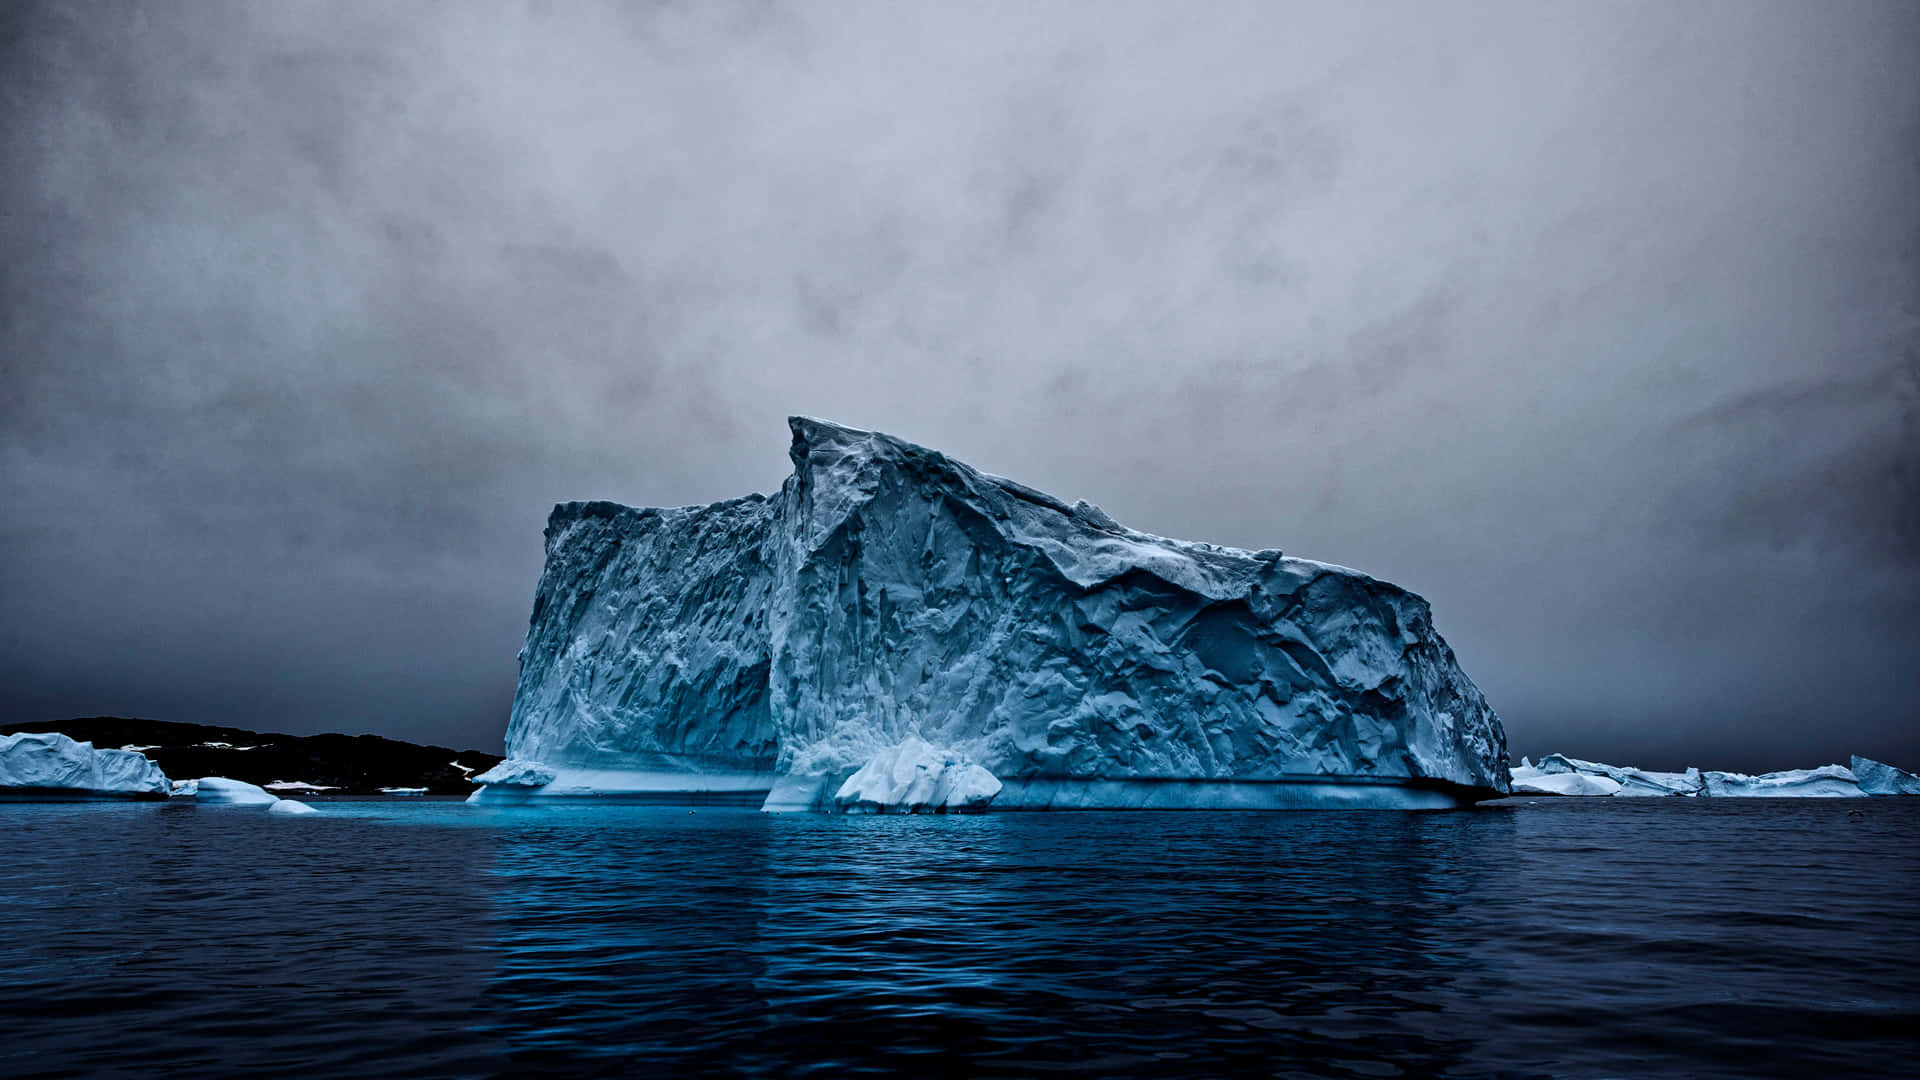 Caption: Majestic Iceberg at the Heart of the Ocean Wallpaper